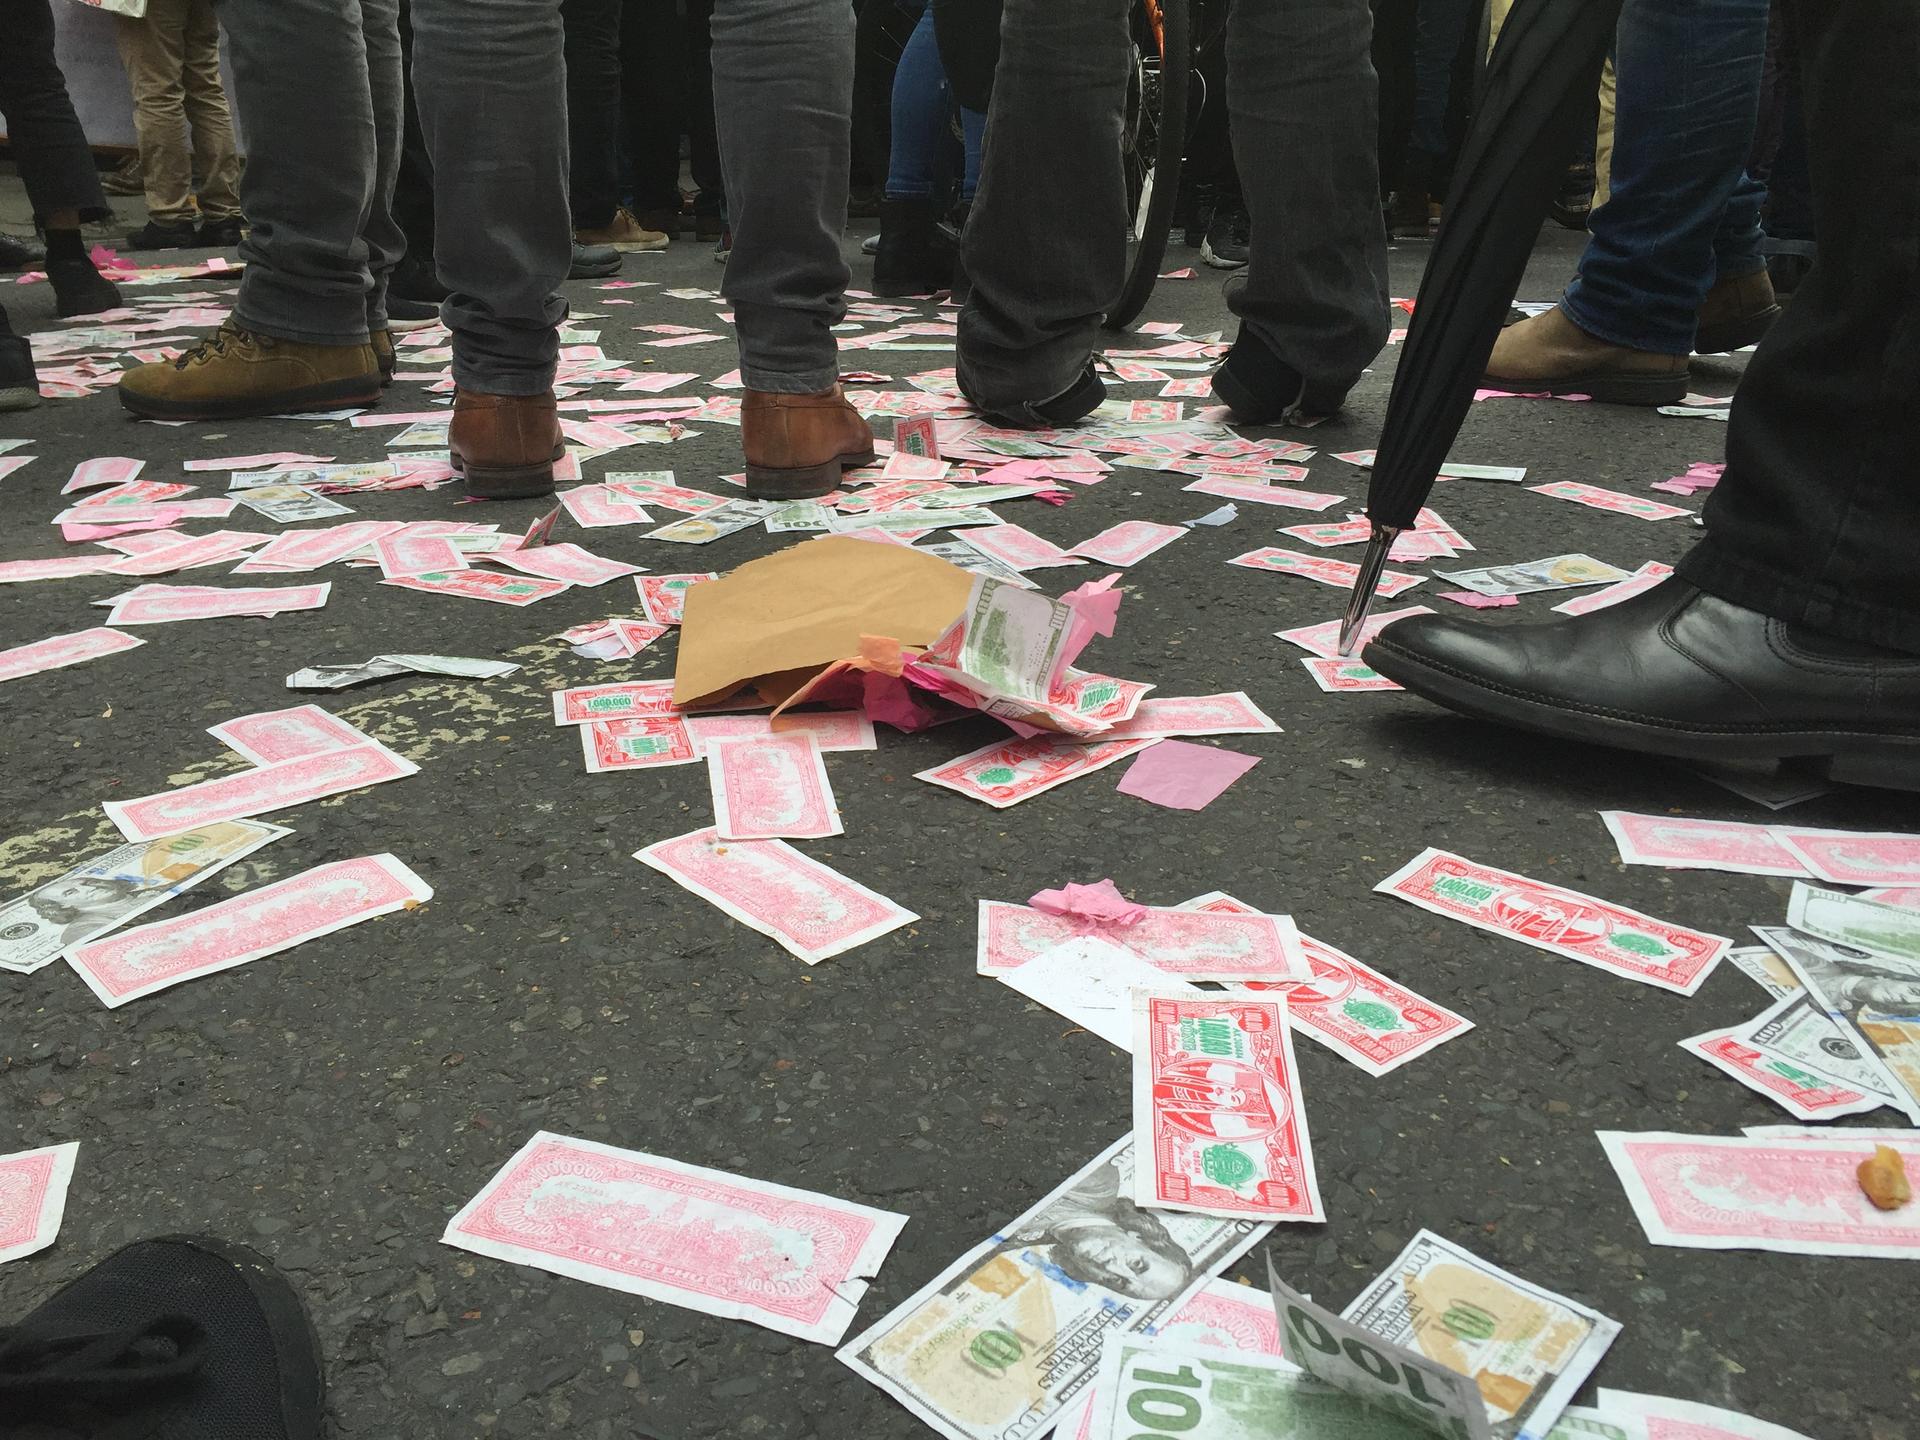 Fake money covers the street in London where thousands called for the resignation of Prime Minister David Cameron.